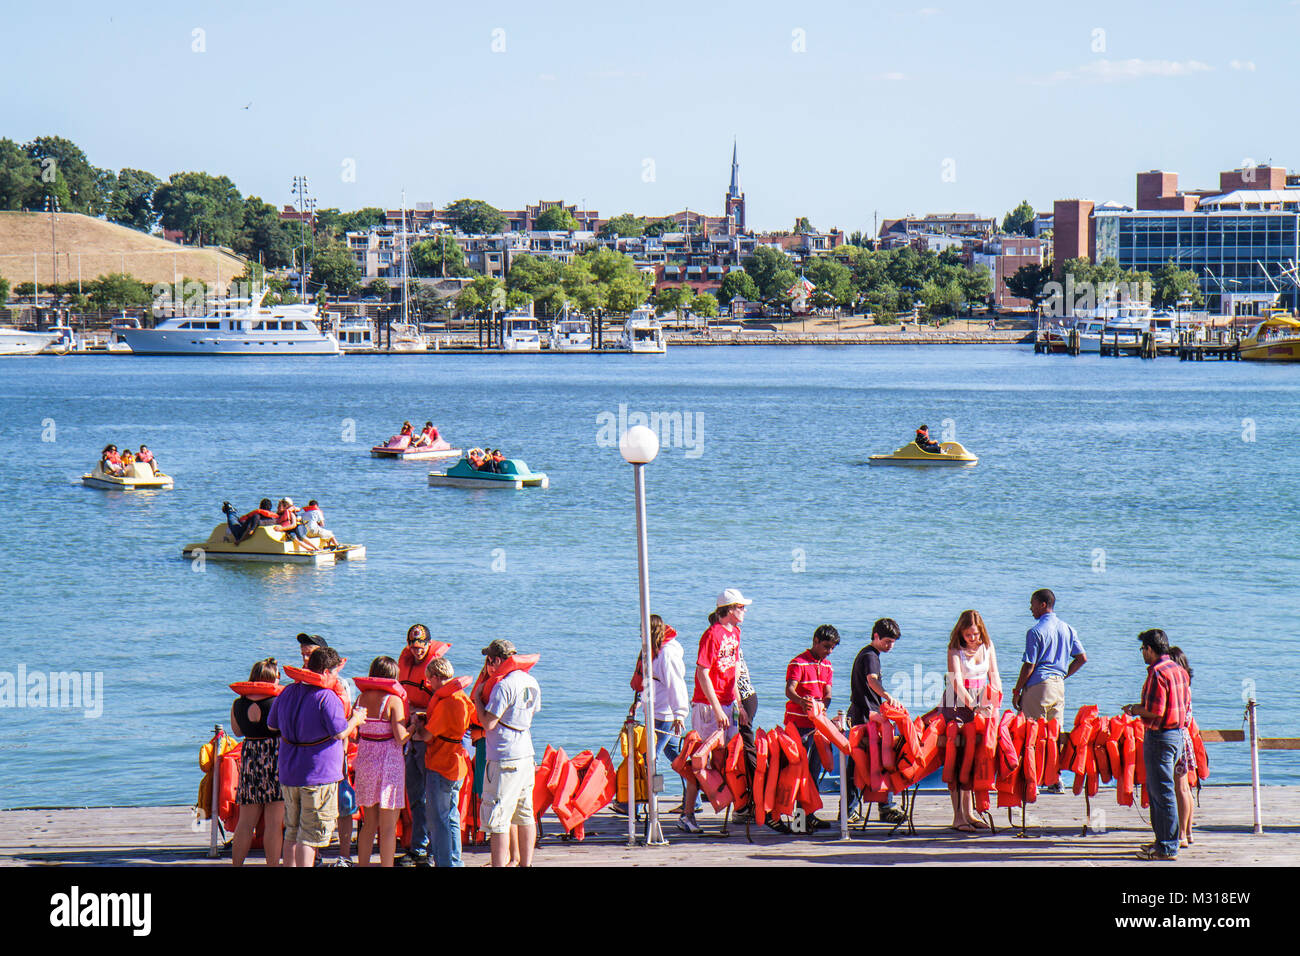 Baltimore Maryland,Inner Harbor,harbour,Patapsco River,port,waterfront,Harborplace,attraction,paddle boat ride,queue,line,Asian Black African Africans Stock Photo